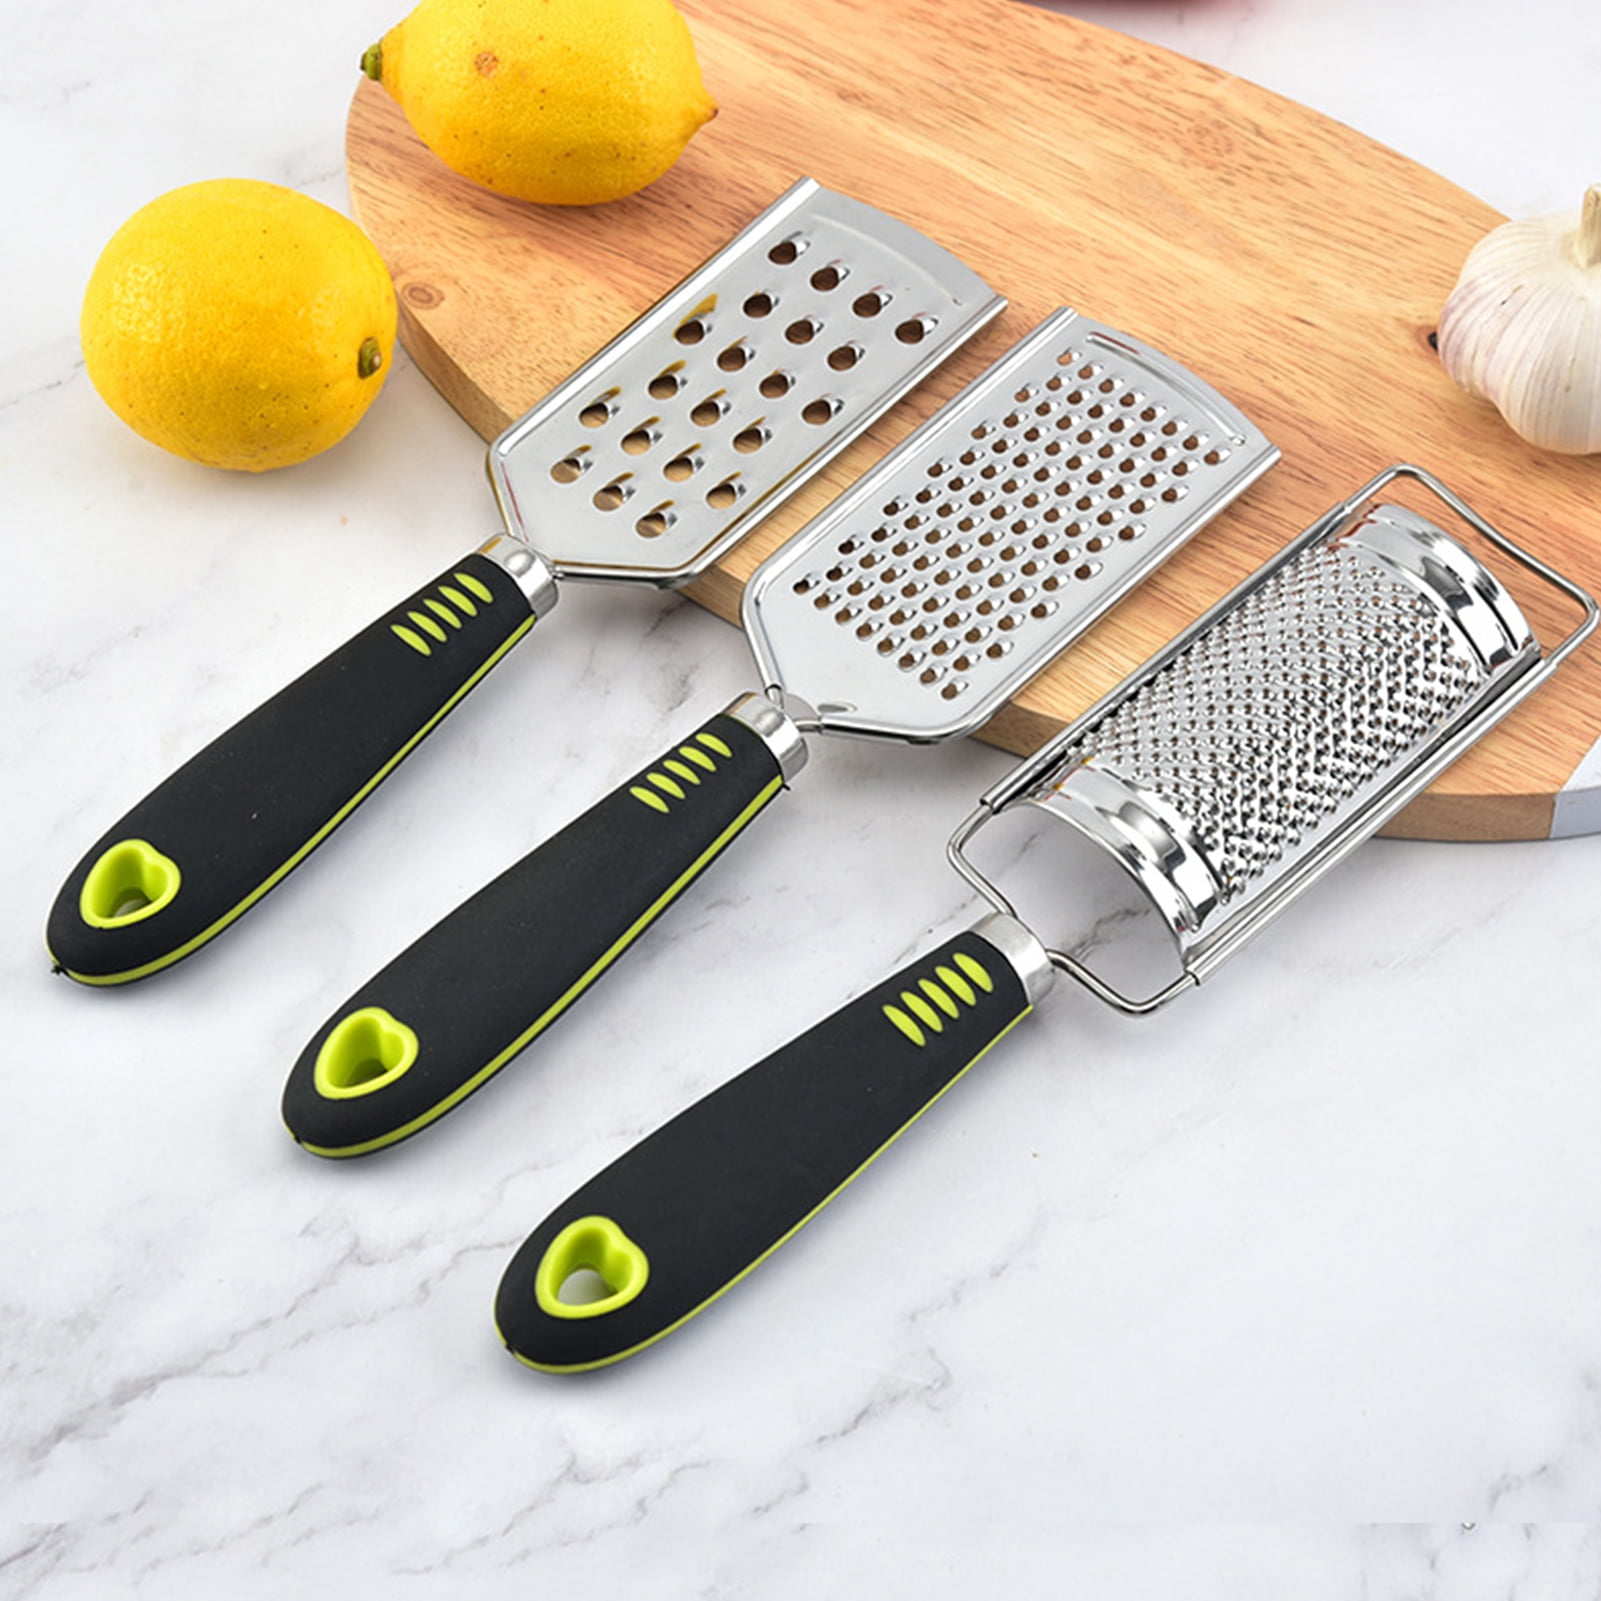 Yesbay Carrot Grater Three-Blade Handheld Rust-proof with Handle Sharp Fast Cooking Kitchen Tool Vegetable Cabbage Slicer Grater Home Use, Size: 22